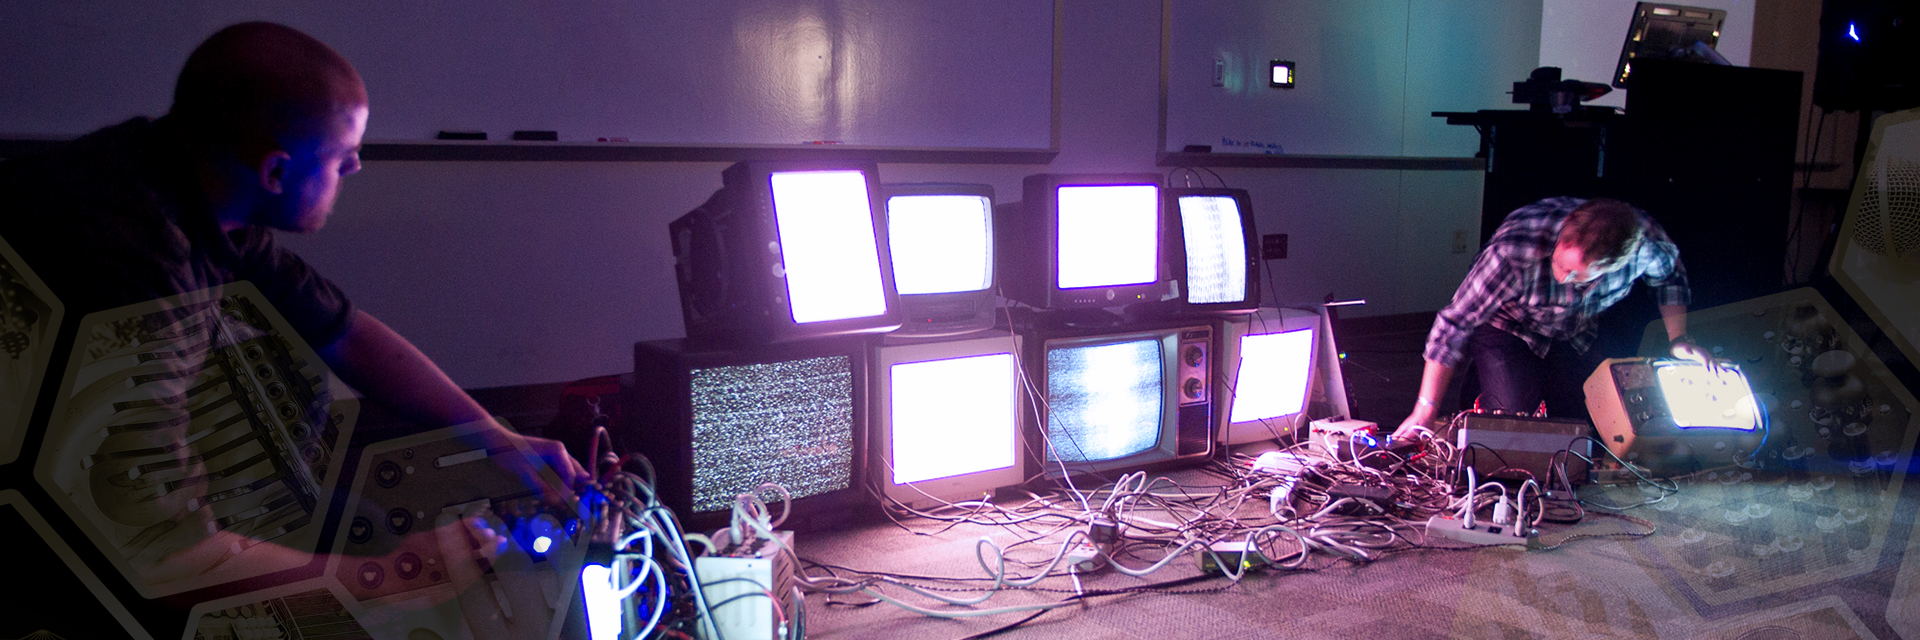 Two people on either side of a stack of cathode ray tube TVs showing static on the screens.